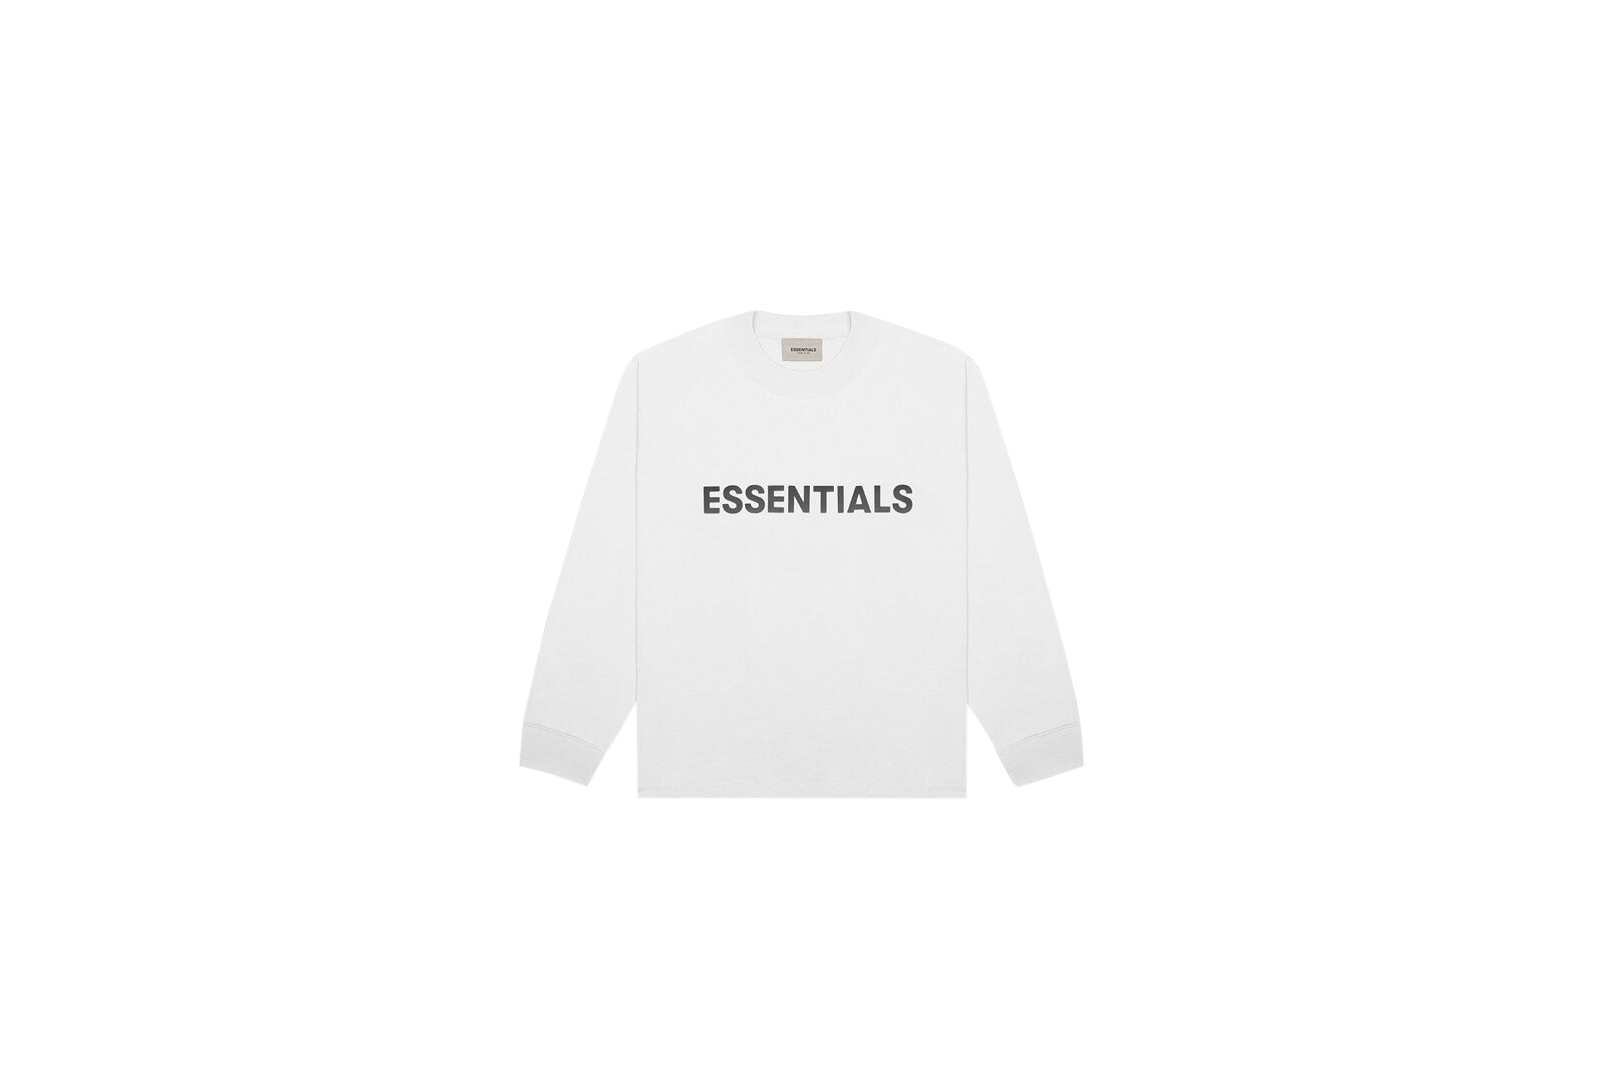 Fear of God Essentials 3D Silicon Applique Boxy Long Sleeve T ...